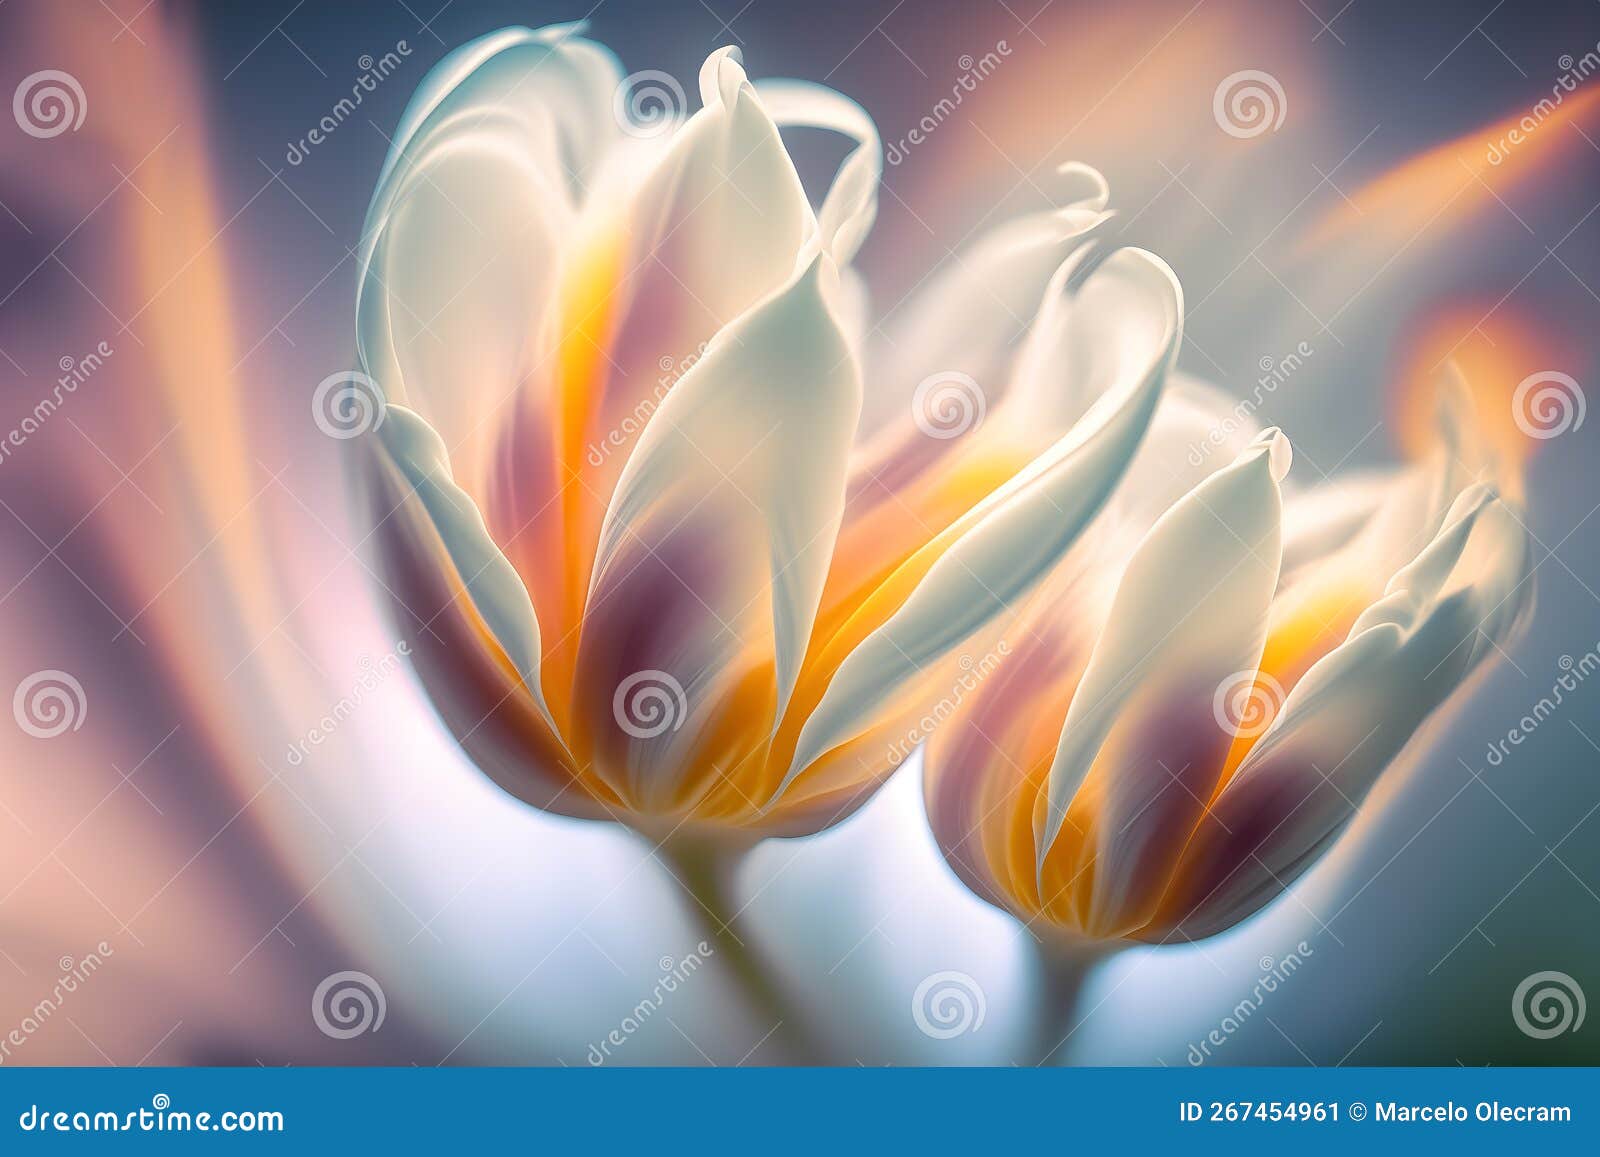  with tulips in pastel colors. soft blur background effect.